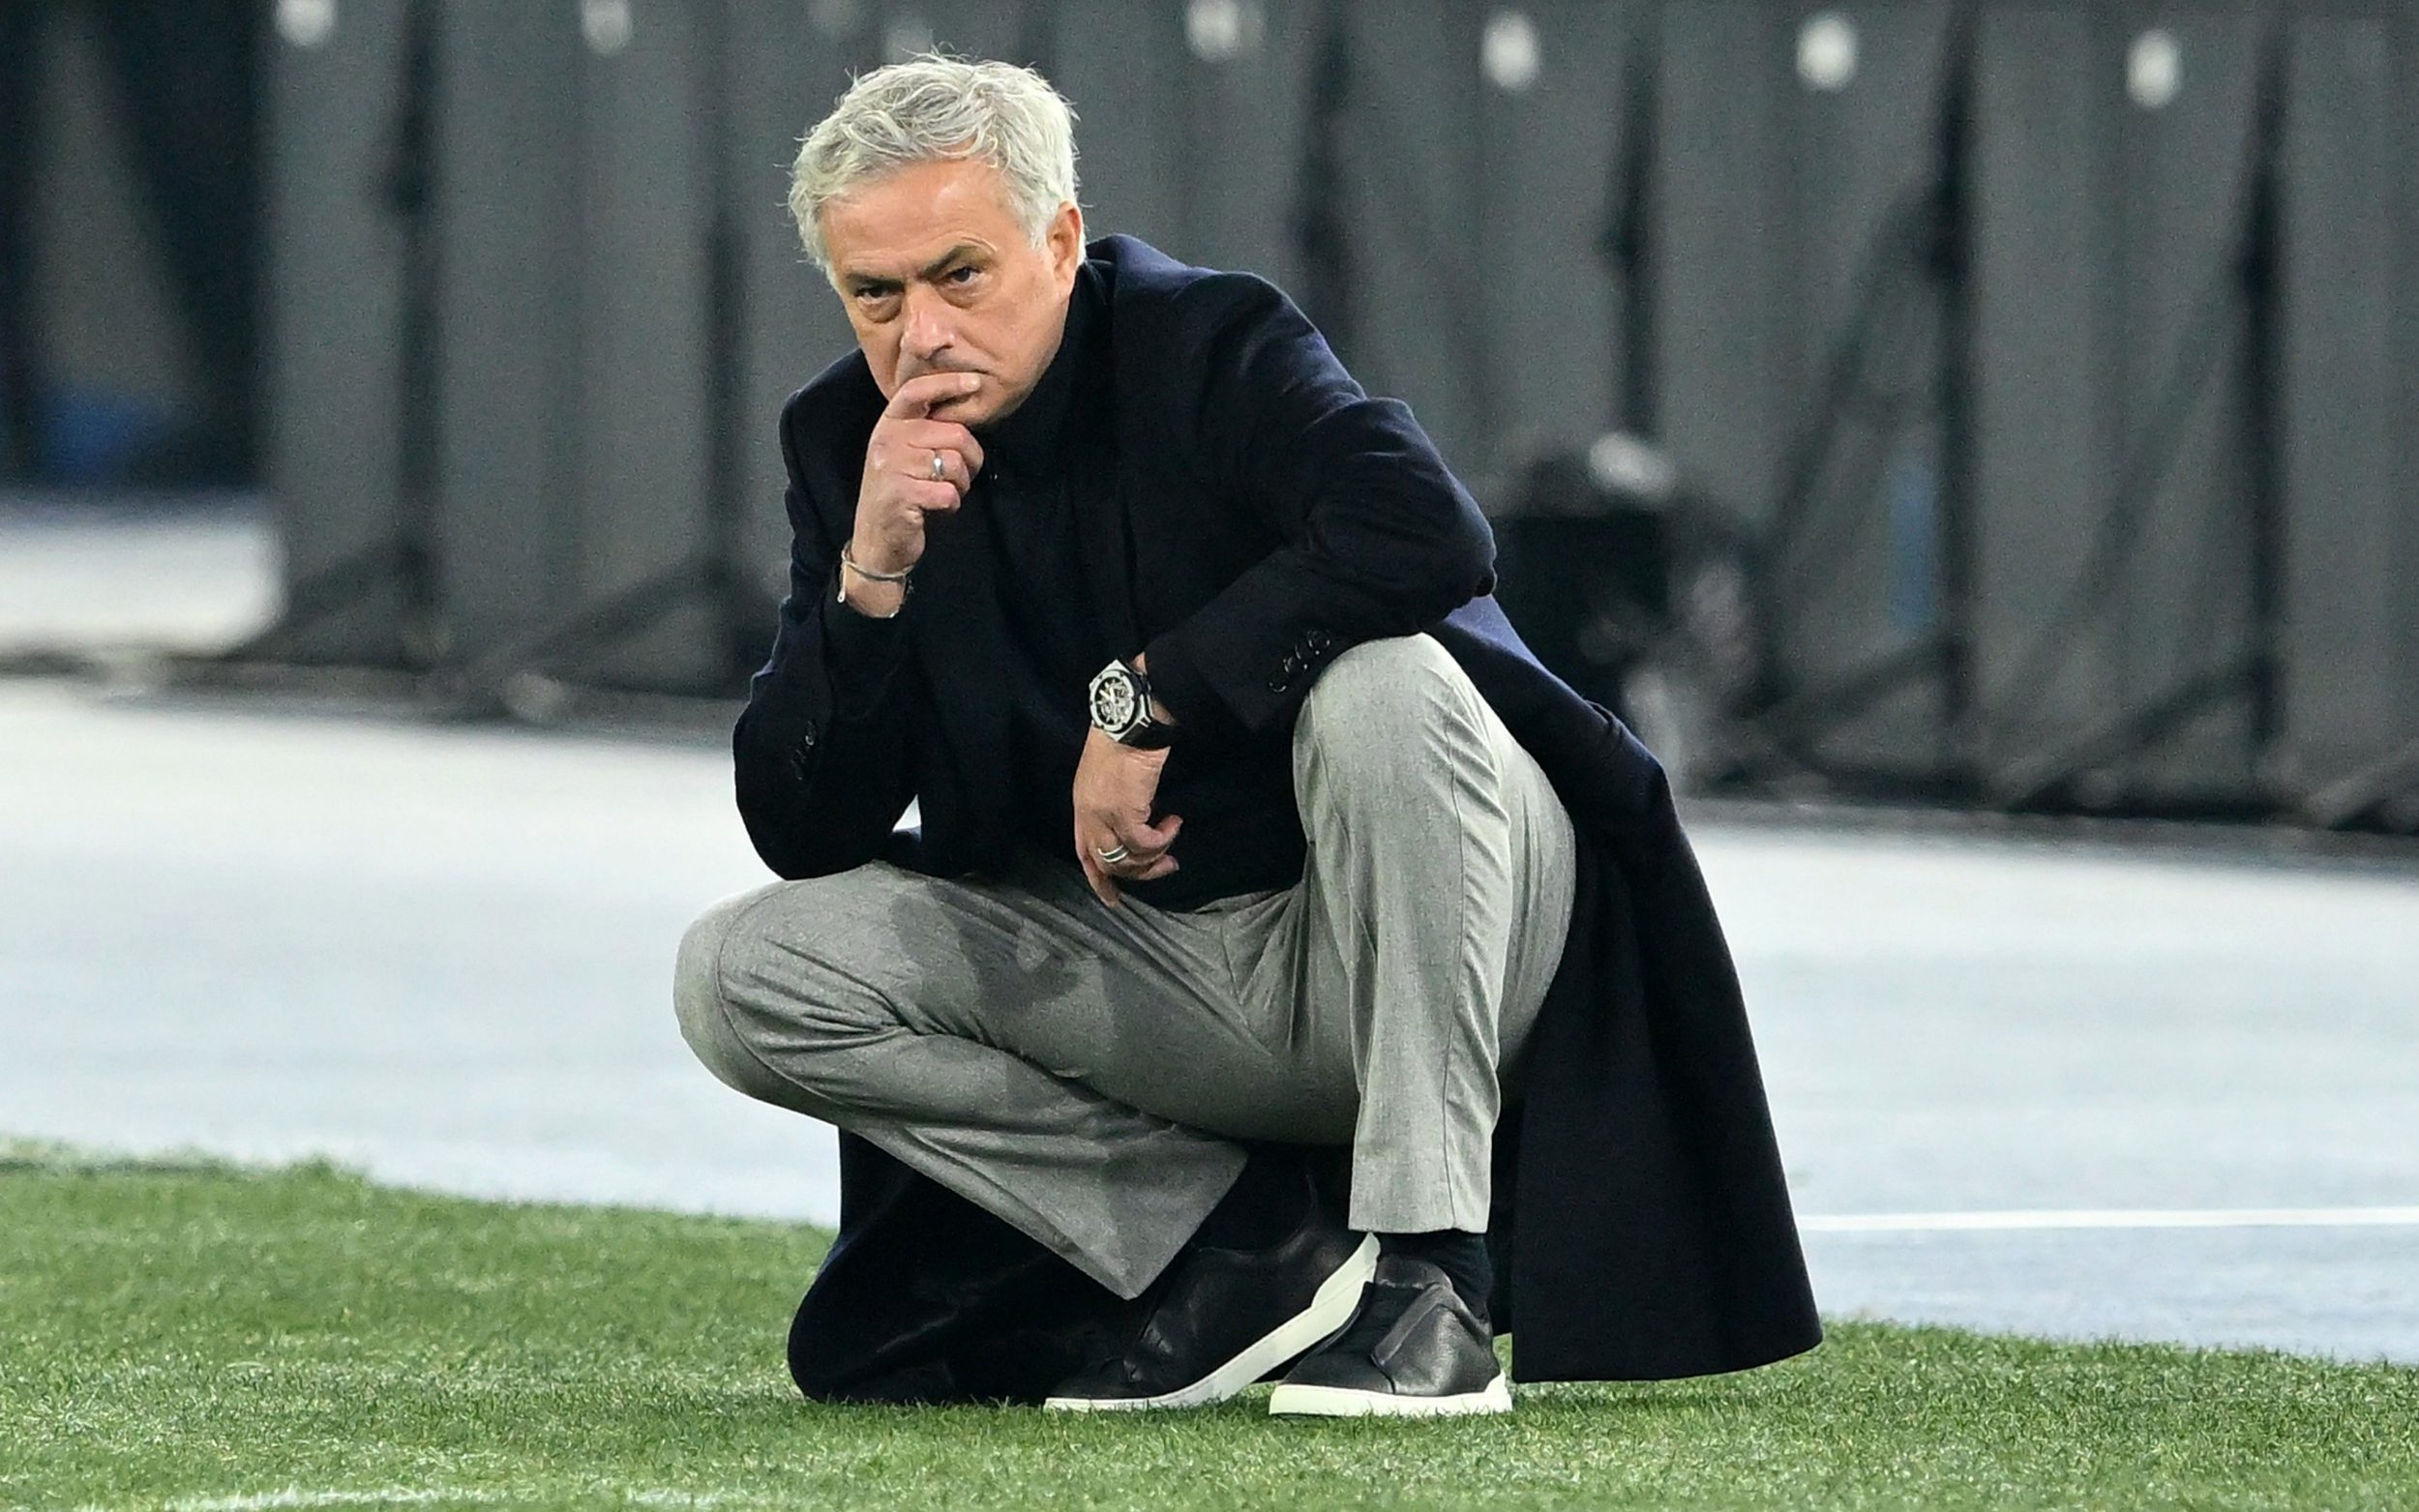 jose mourinho isn't done yet – the special one thinks he still has one more top job in him